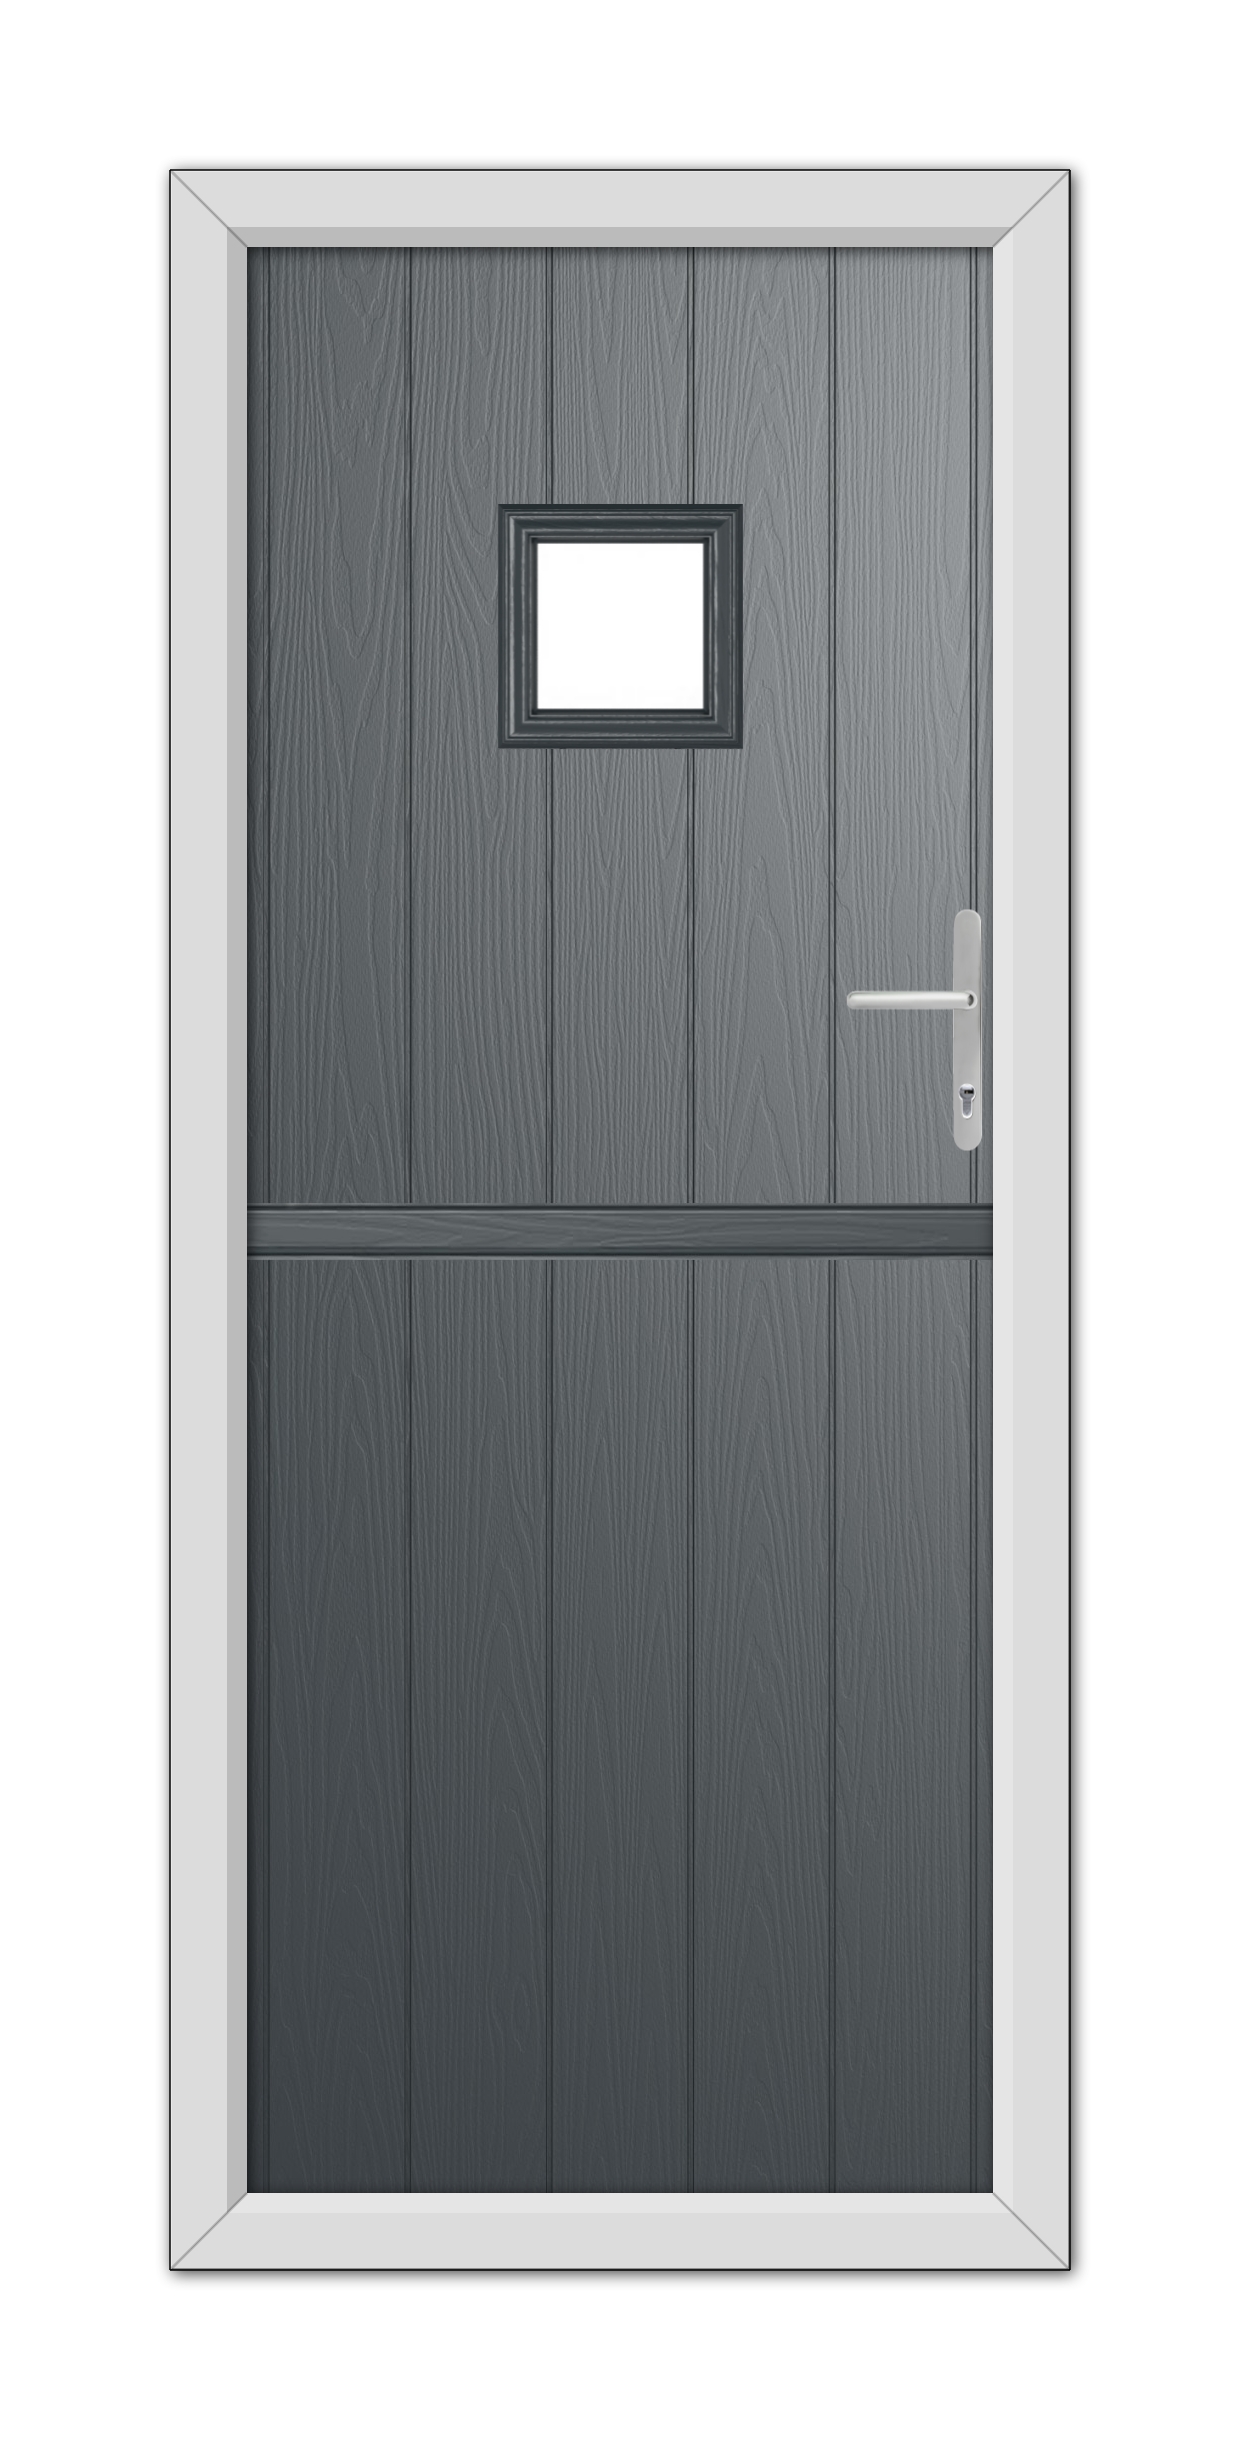 A modern Anthracite Grey Brampton Stable Composite Door with a small square window at the top and a metallic handle, set within a white frame.